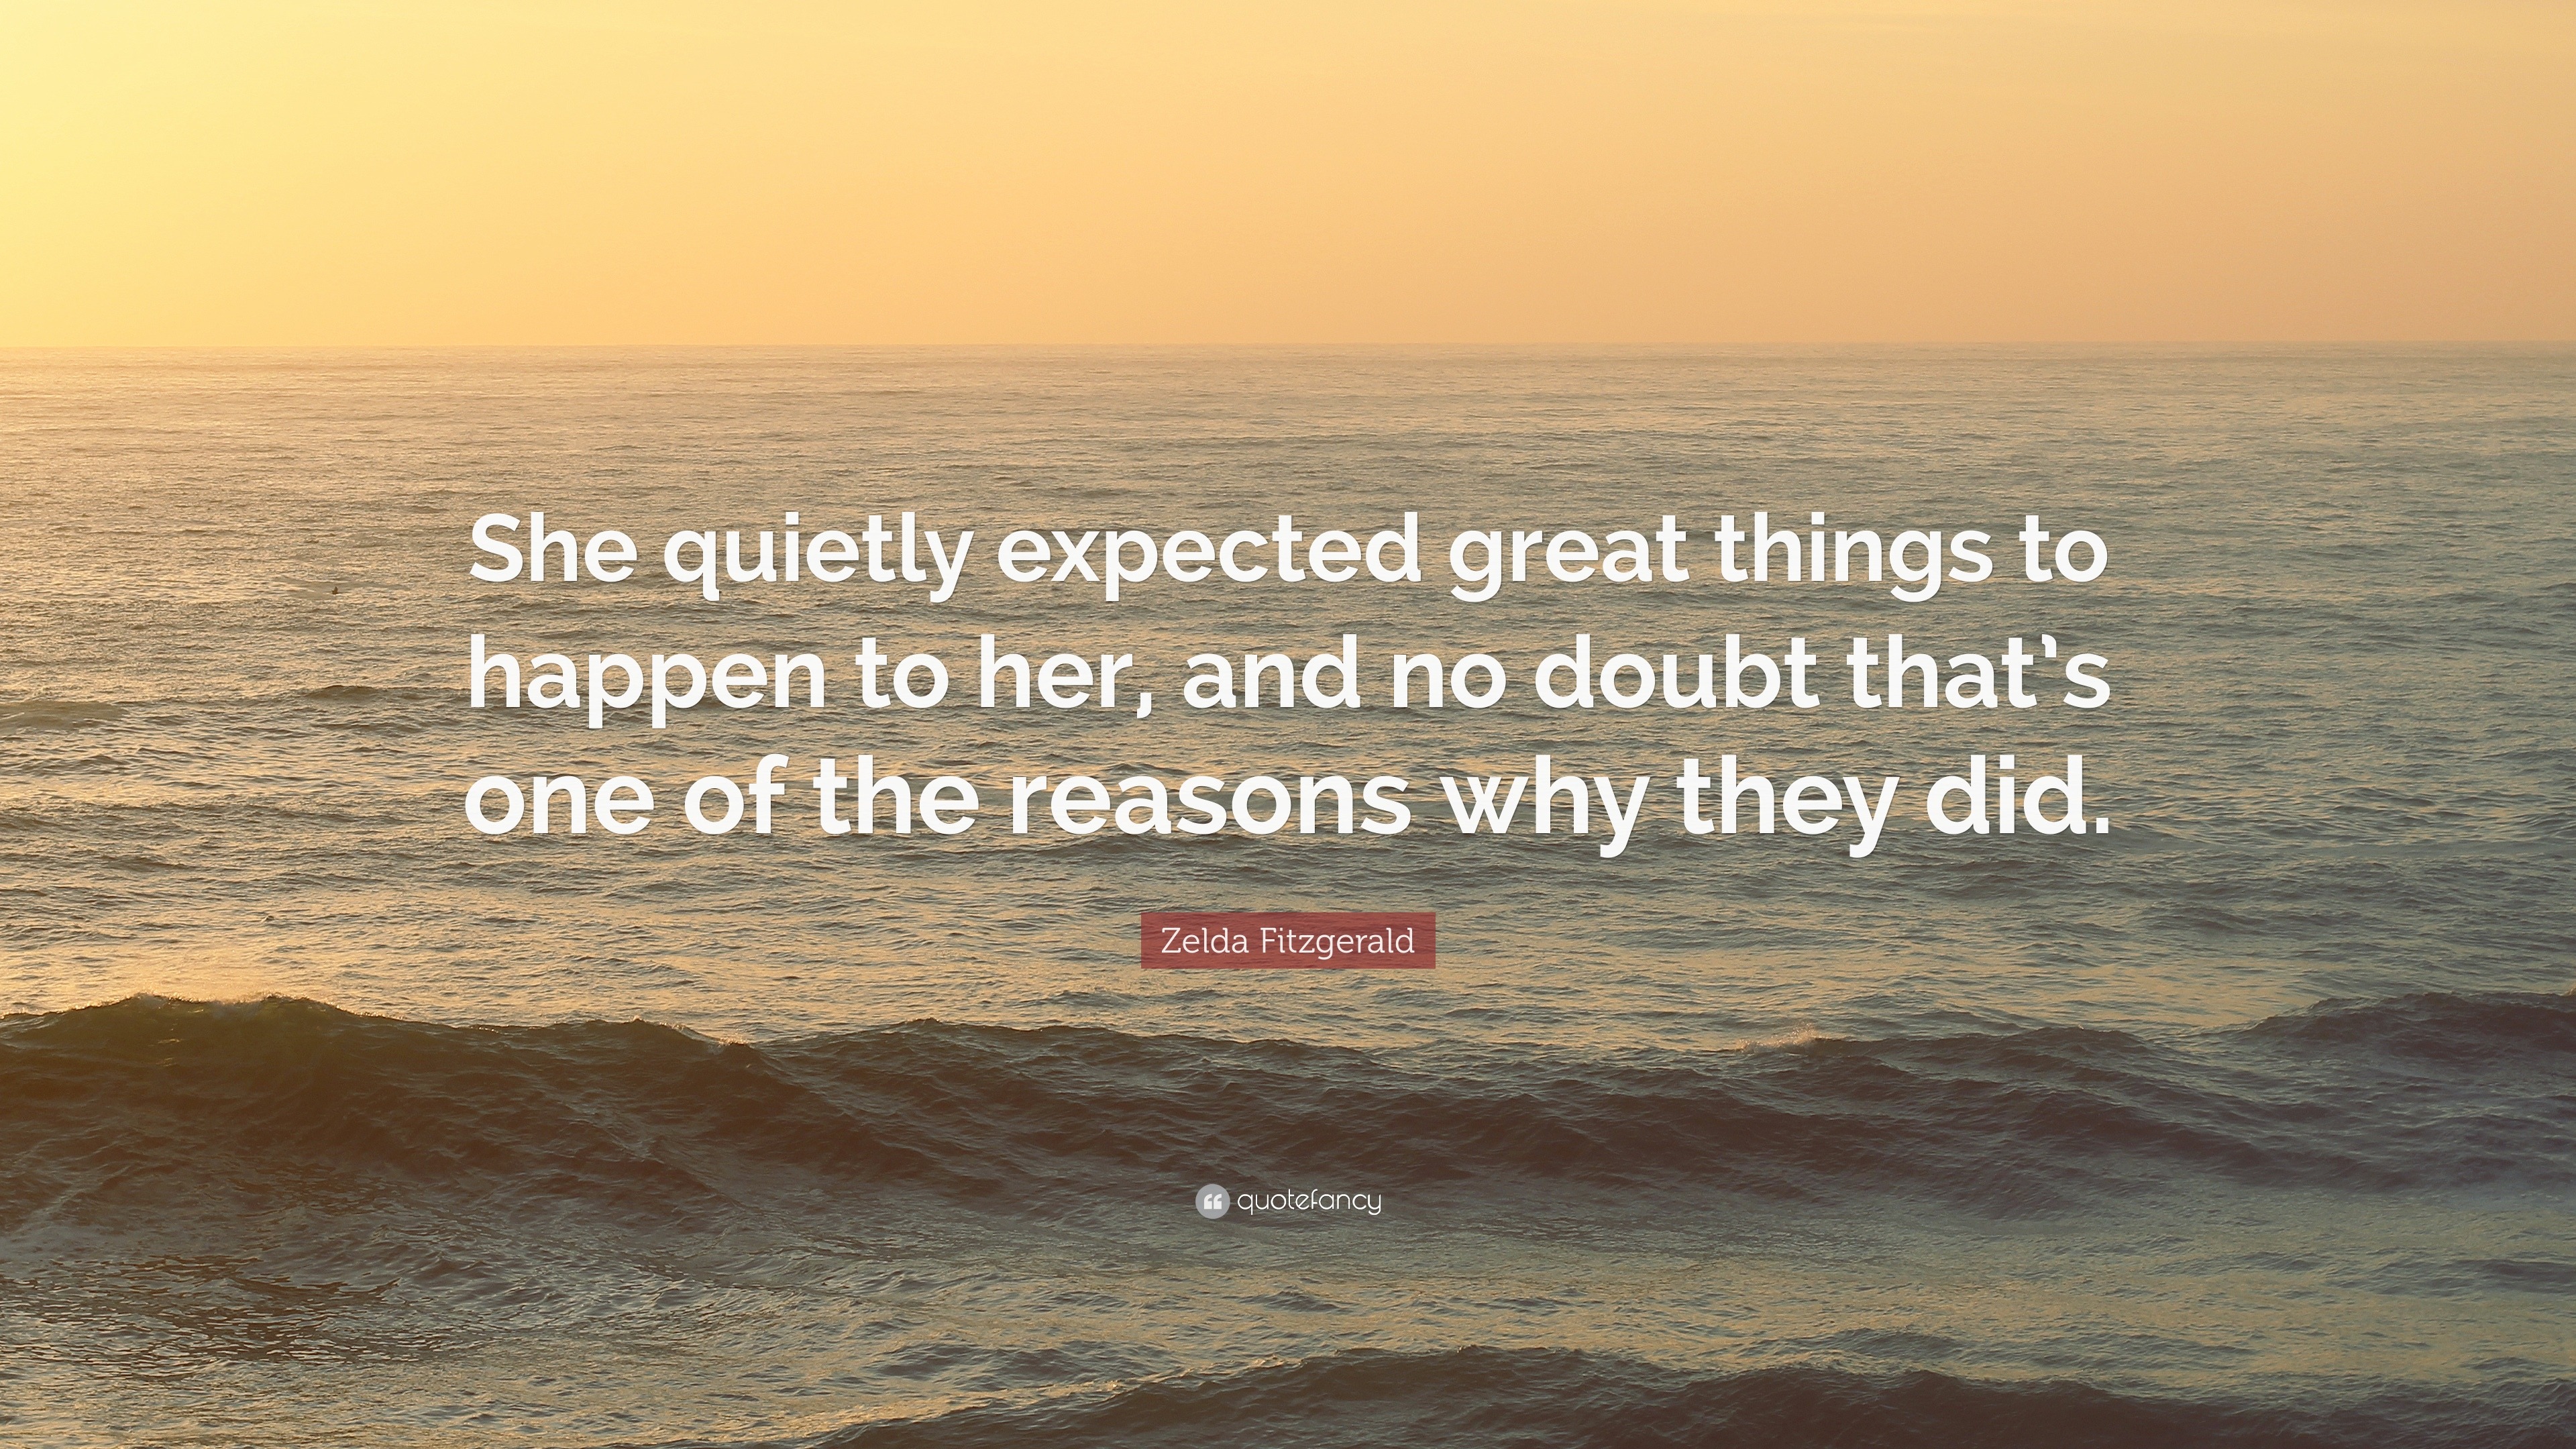 Zelda Fitzgerald Quote: “She quietly expected great things to happen to ...